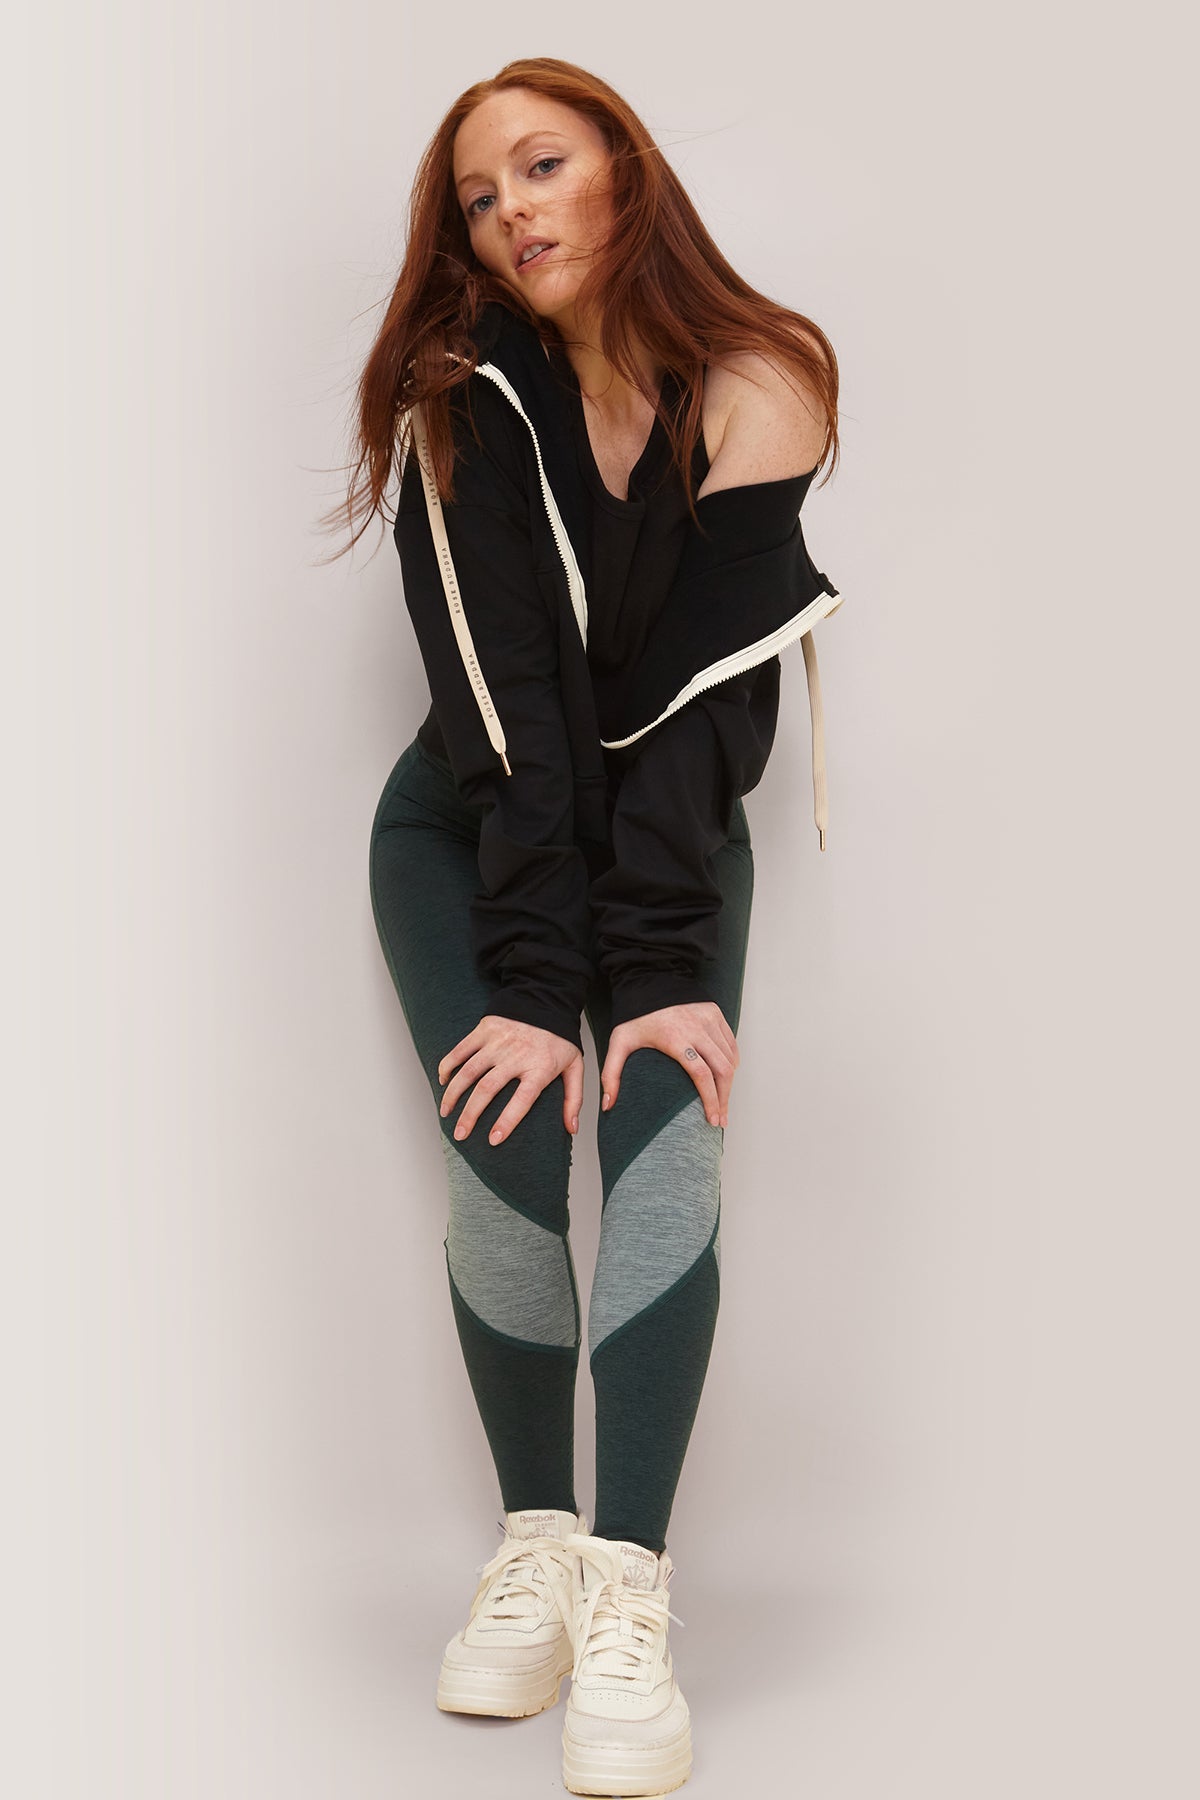 Femme qui porte les leggings Buttery Soft BFF High-Rise Keep Moving de Rose Boreal./ Women wearing the buttery soft BFF high-rise Keep Moving leggings from Rose Boreal. -Fern / Fougère